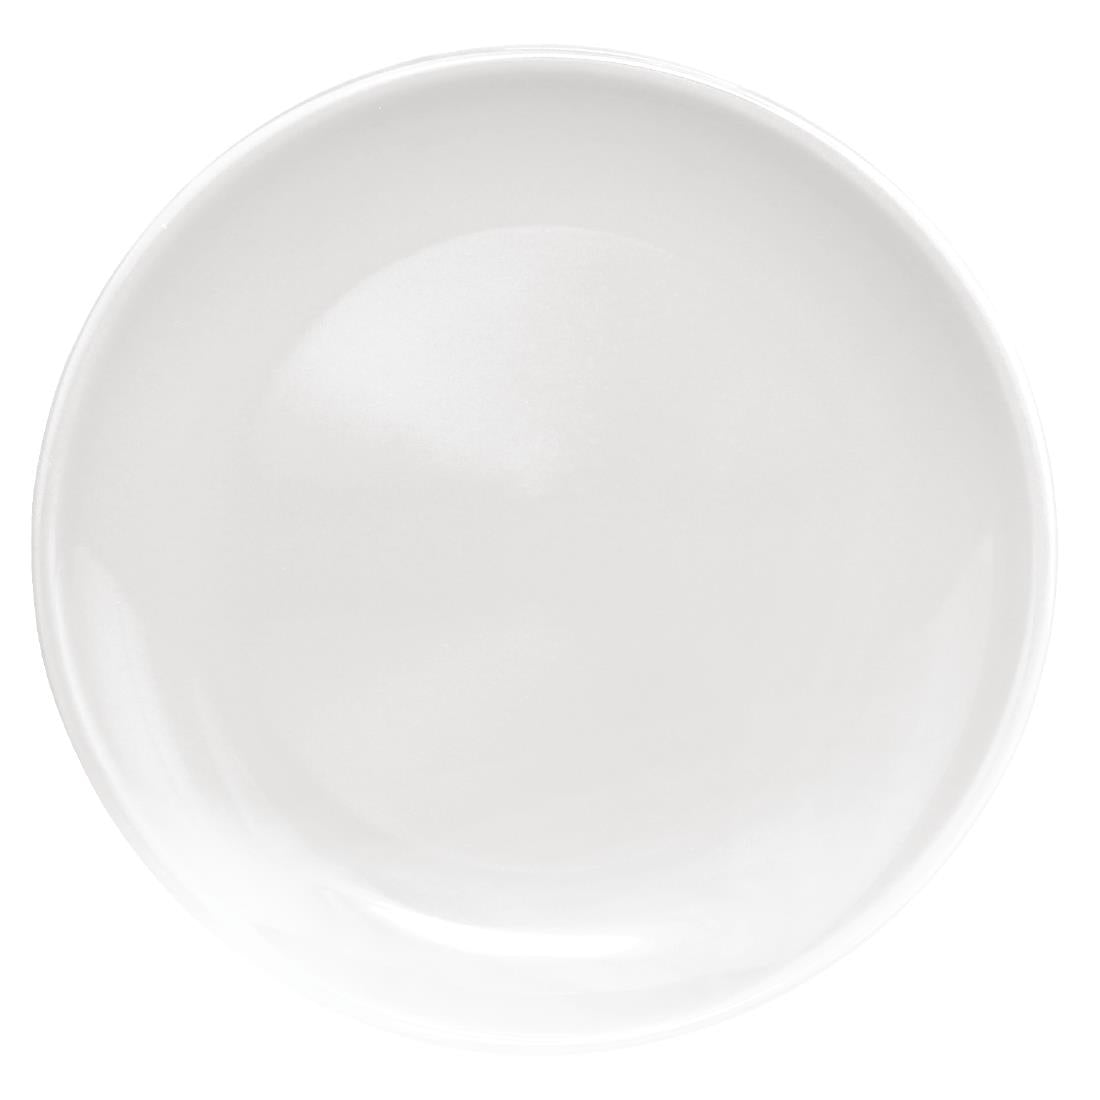 CG353 Olympia Cafe Coupe Plate White 205mm (Pack of 12)